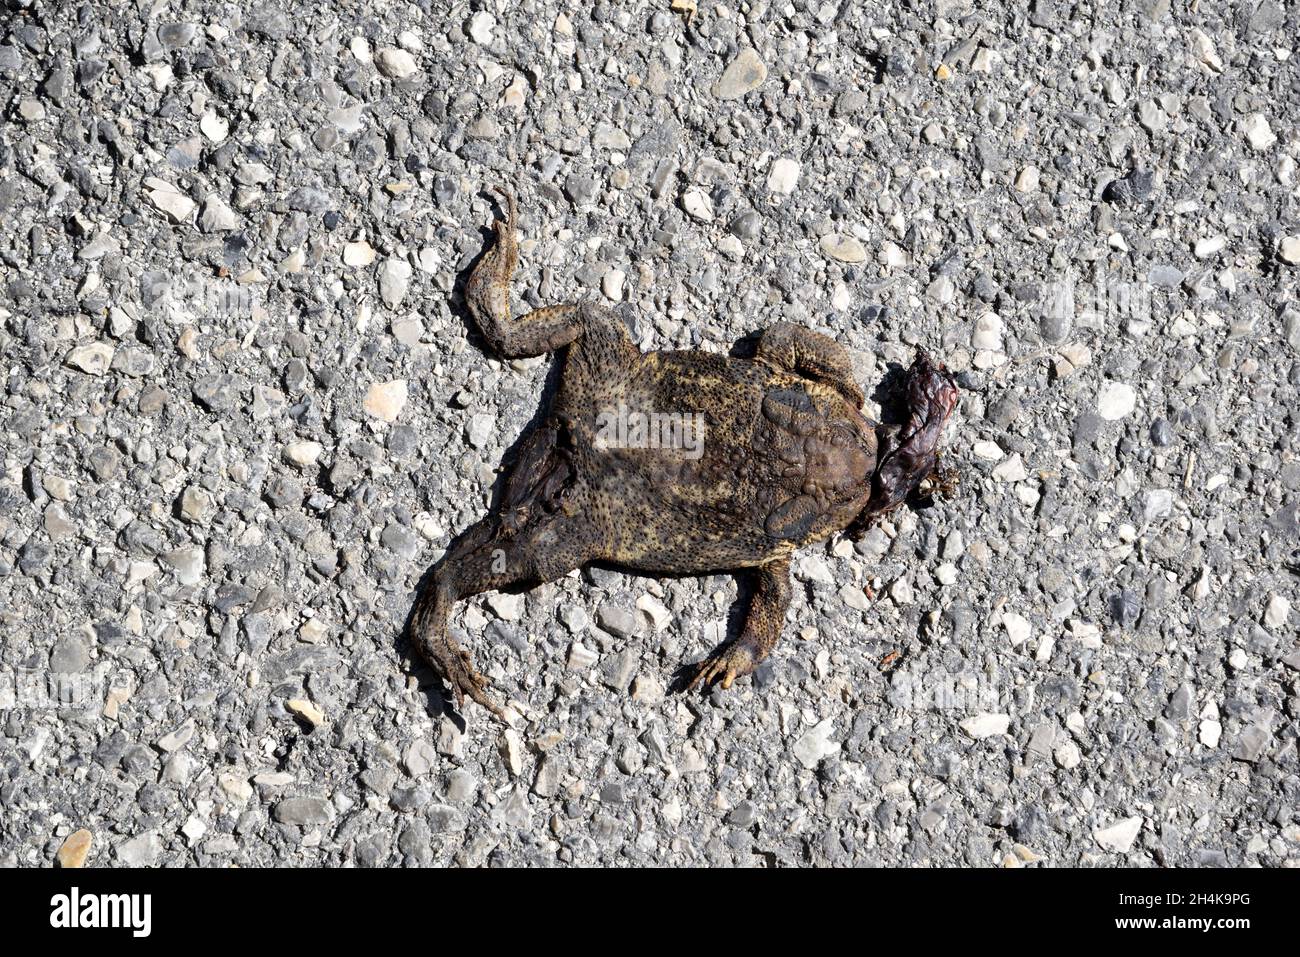 Squashed or Dead Toad, Common Toad or European Toad, Bufo bufo, Roadkill or Road Kill Stock Photo